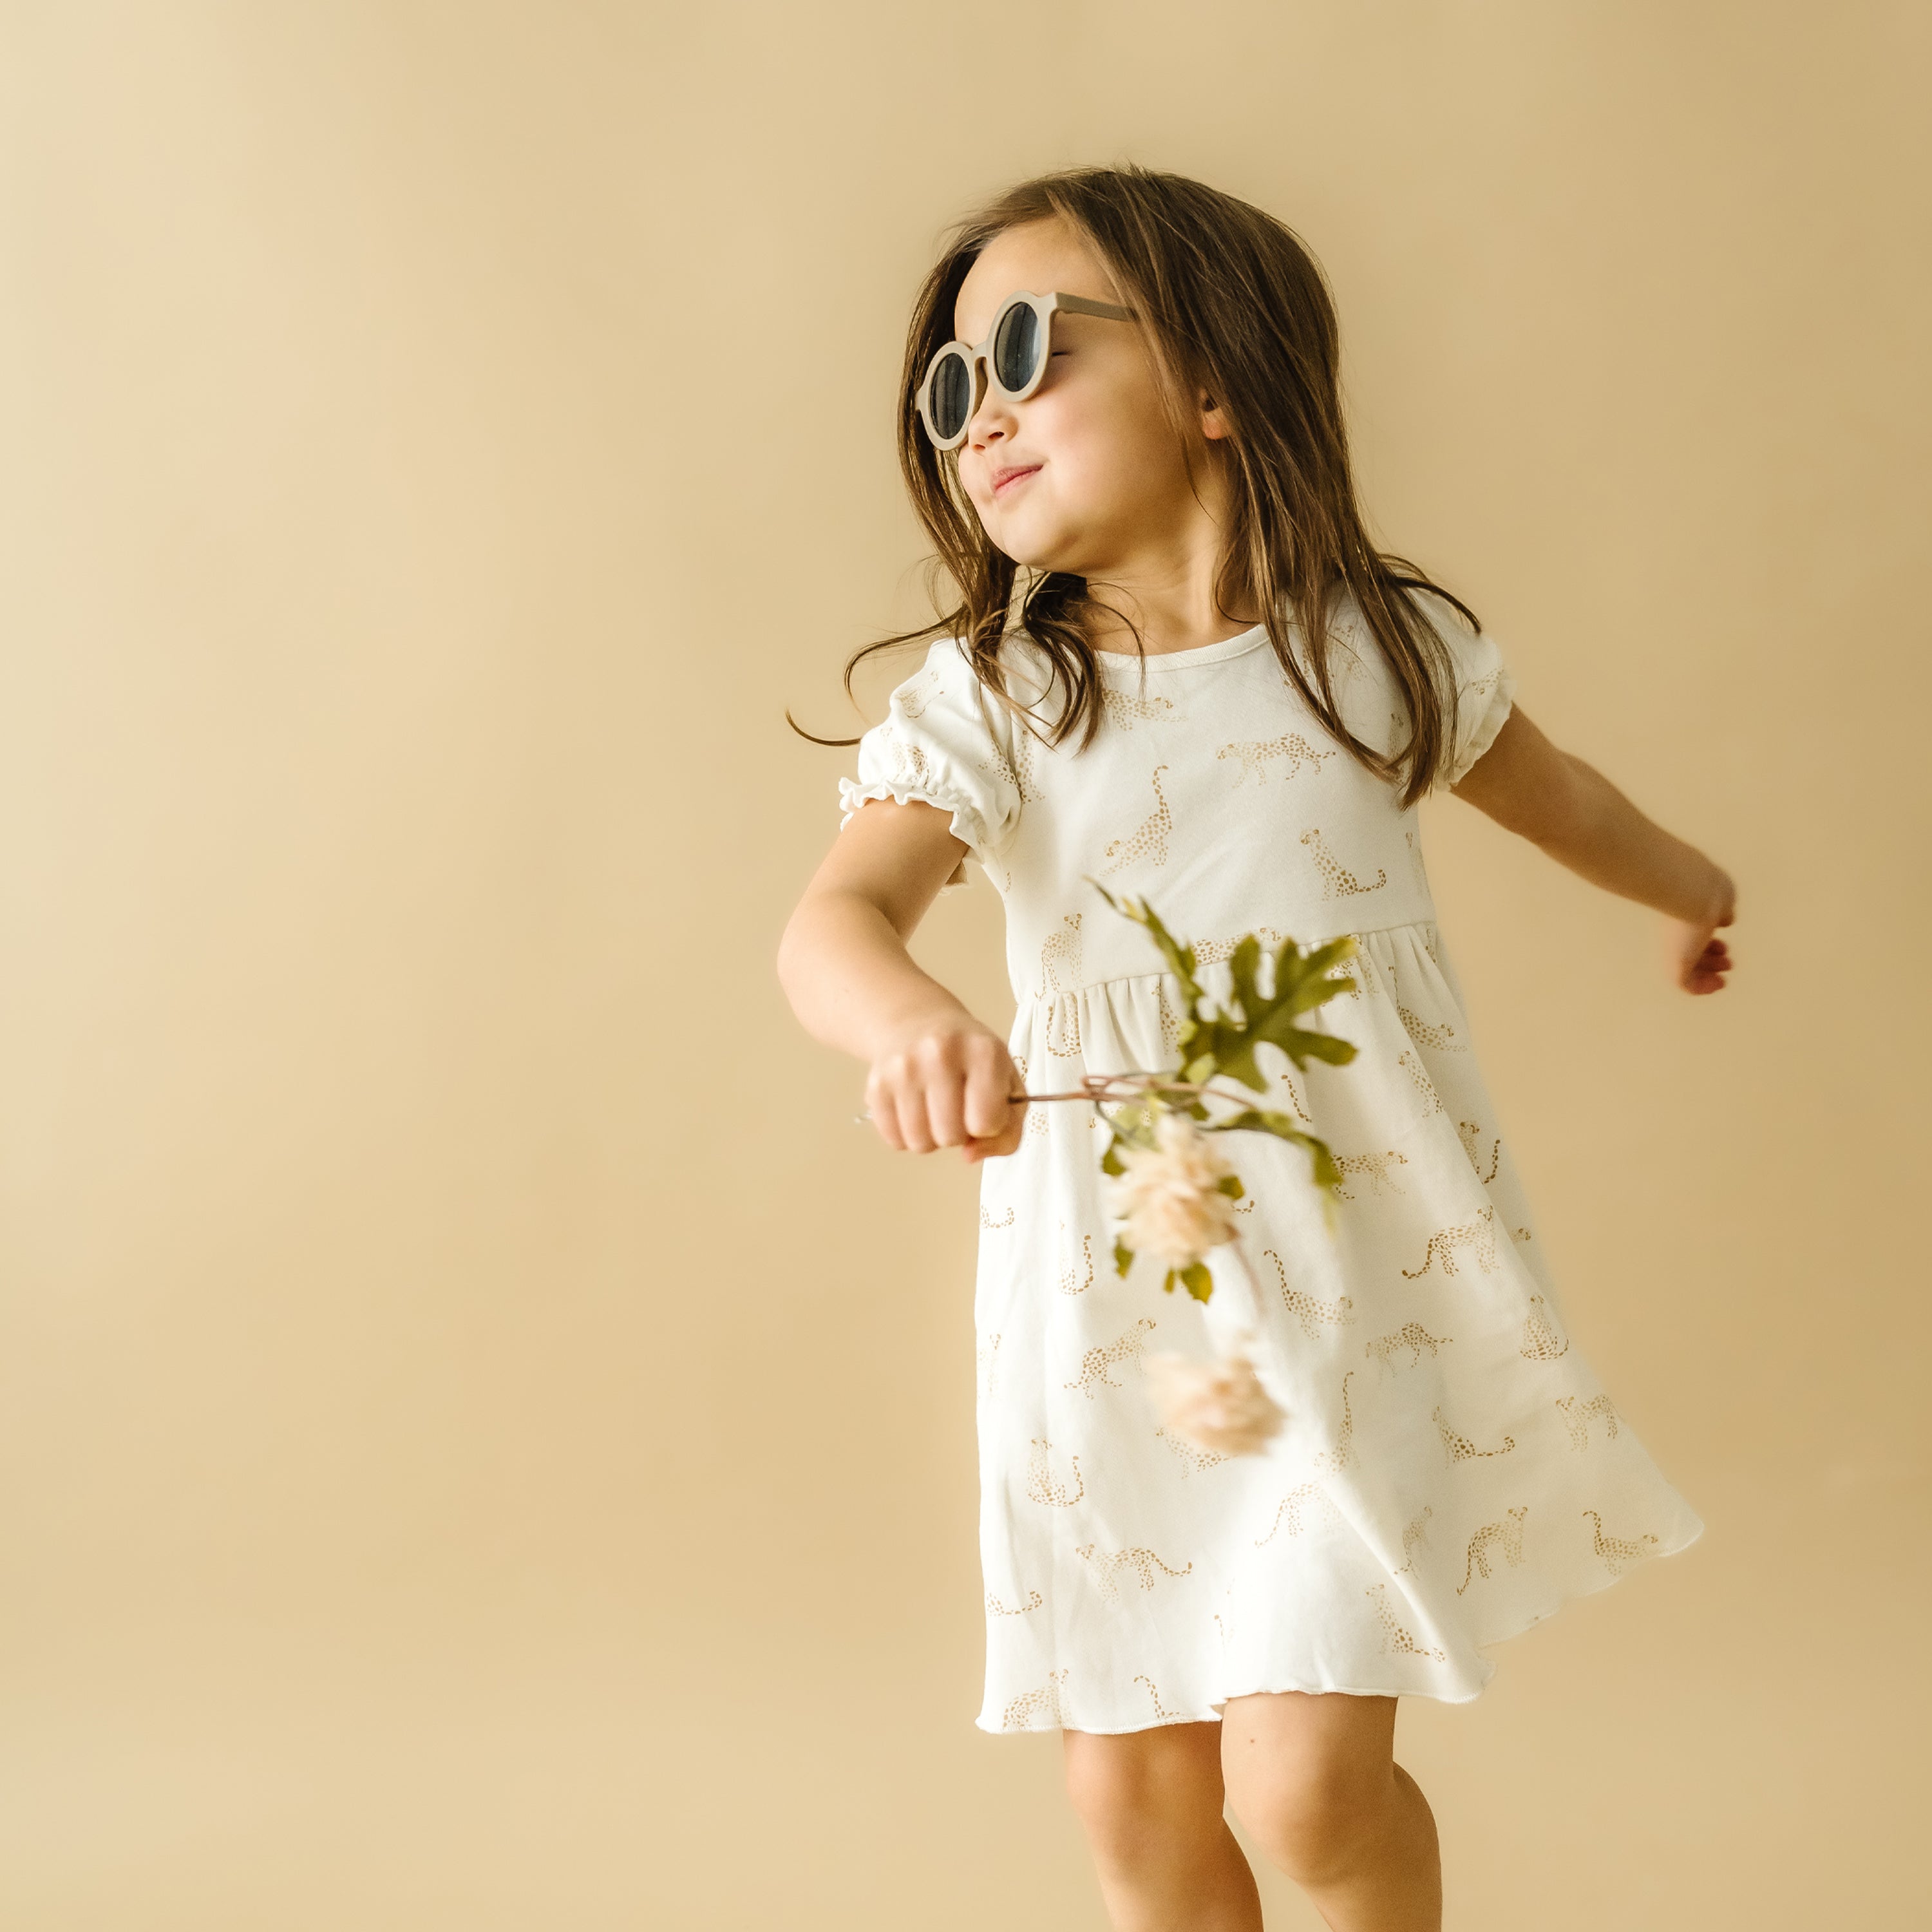 A young girl in a white printed Organic Kids Wildcat Puff Sleeve Dress and oversized sunglasses happily dances, holding a twig with leaves. She's posing against a light beige background.